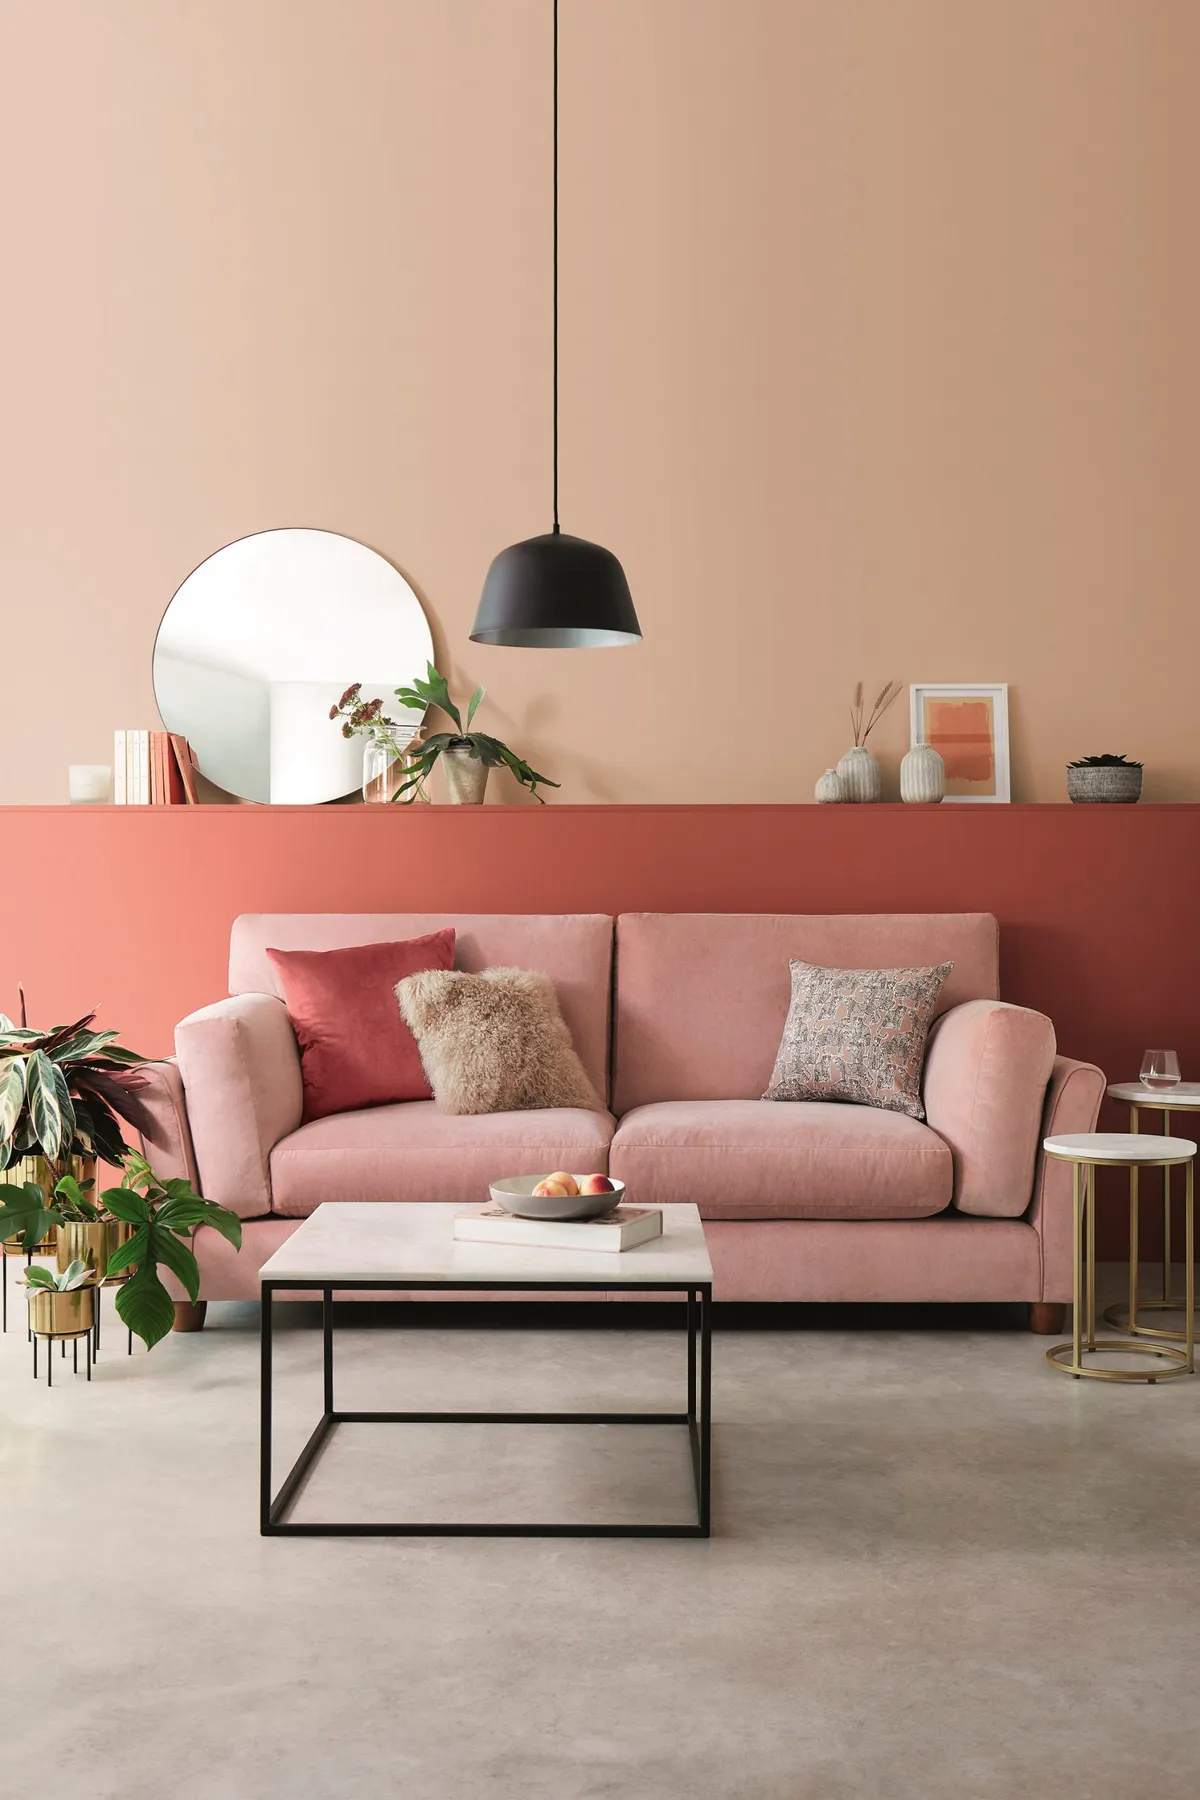 We’re big on pink in this blush scene, featuring the Layla sofa, starting from £899 for a small at Marks & Spencer